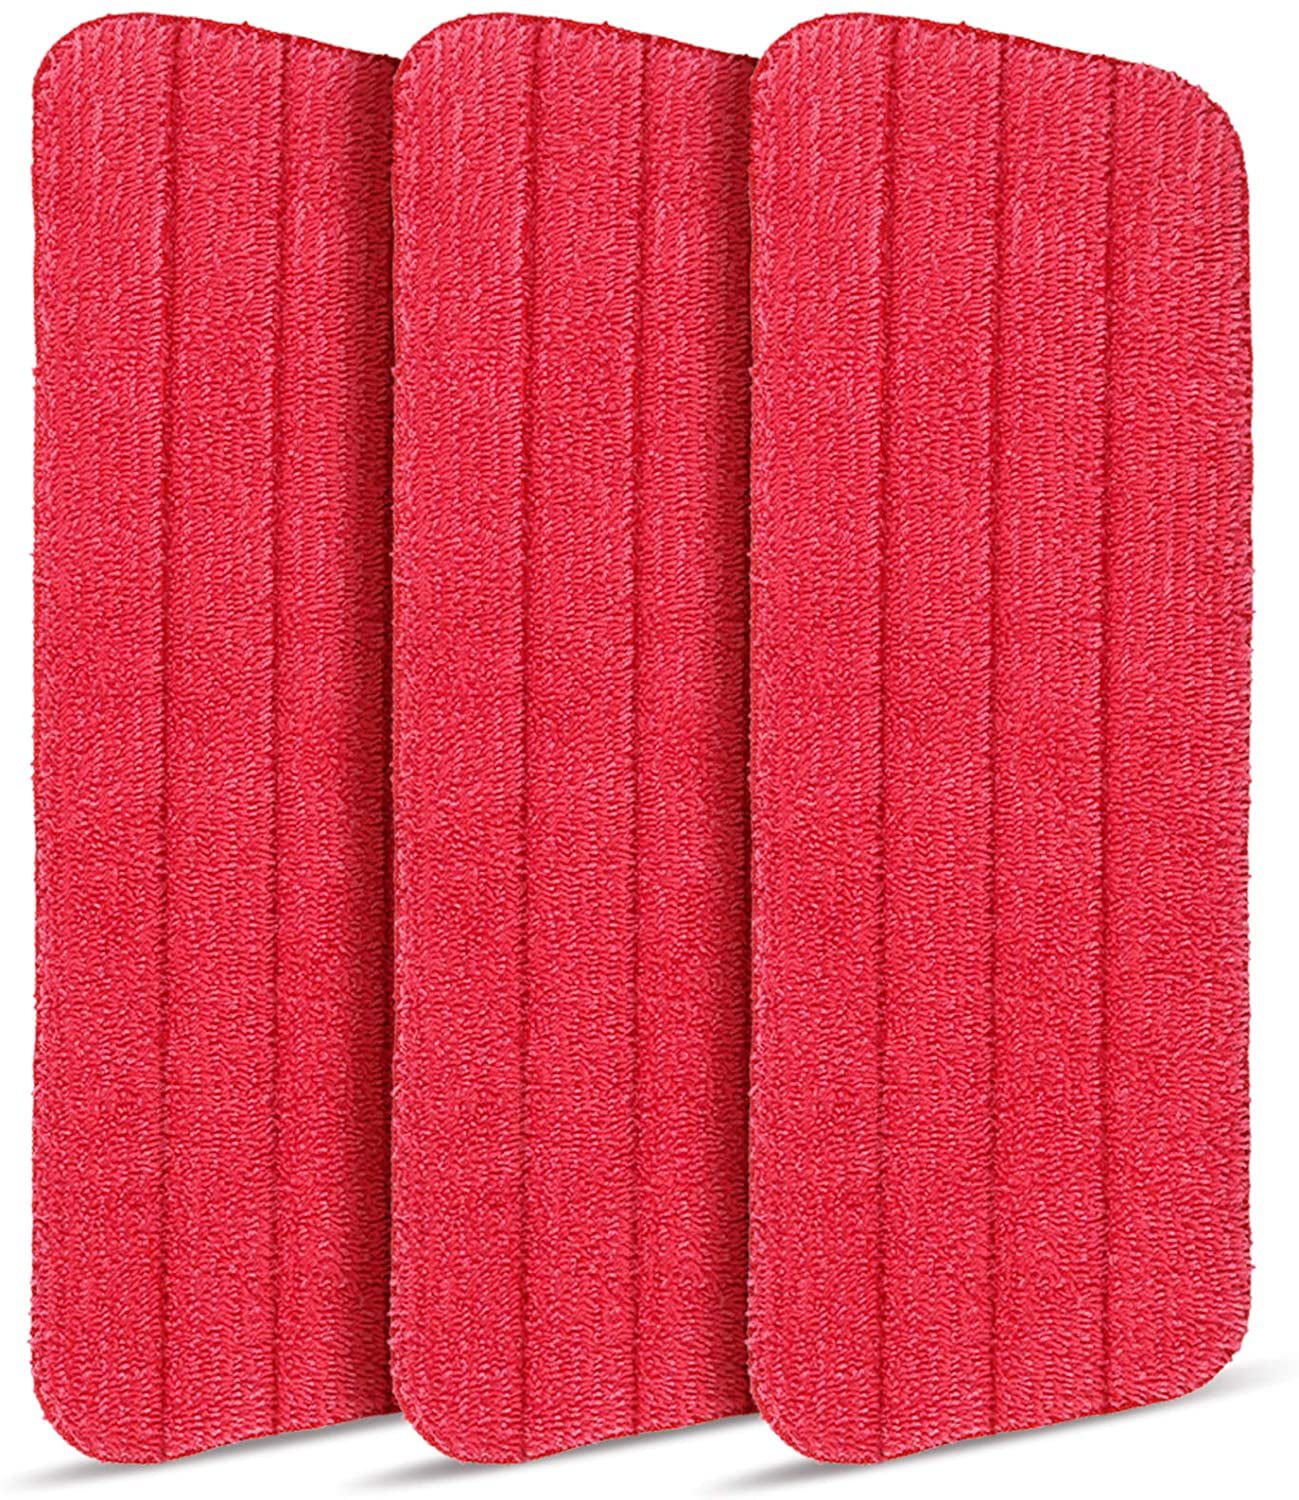 red Set of 8 Microfiber Spray Mop Replacement Heads for Wet/Dry Mops Reusable Replacement Refills Fits for Floor Care System 